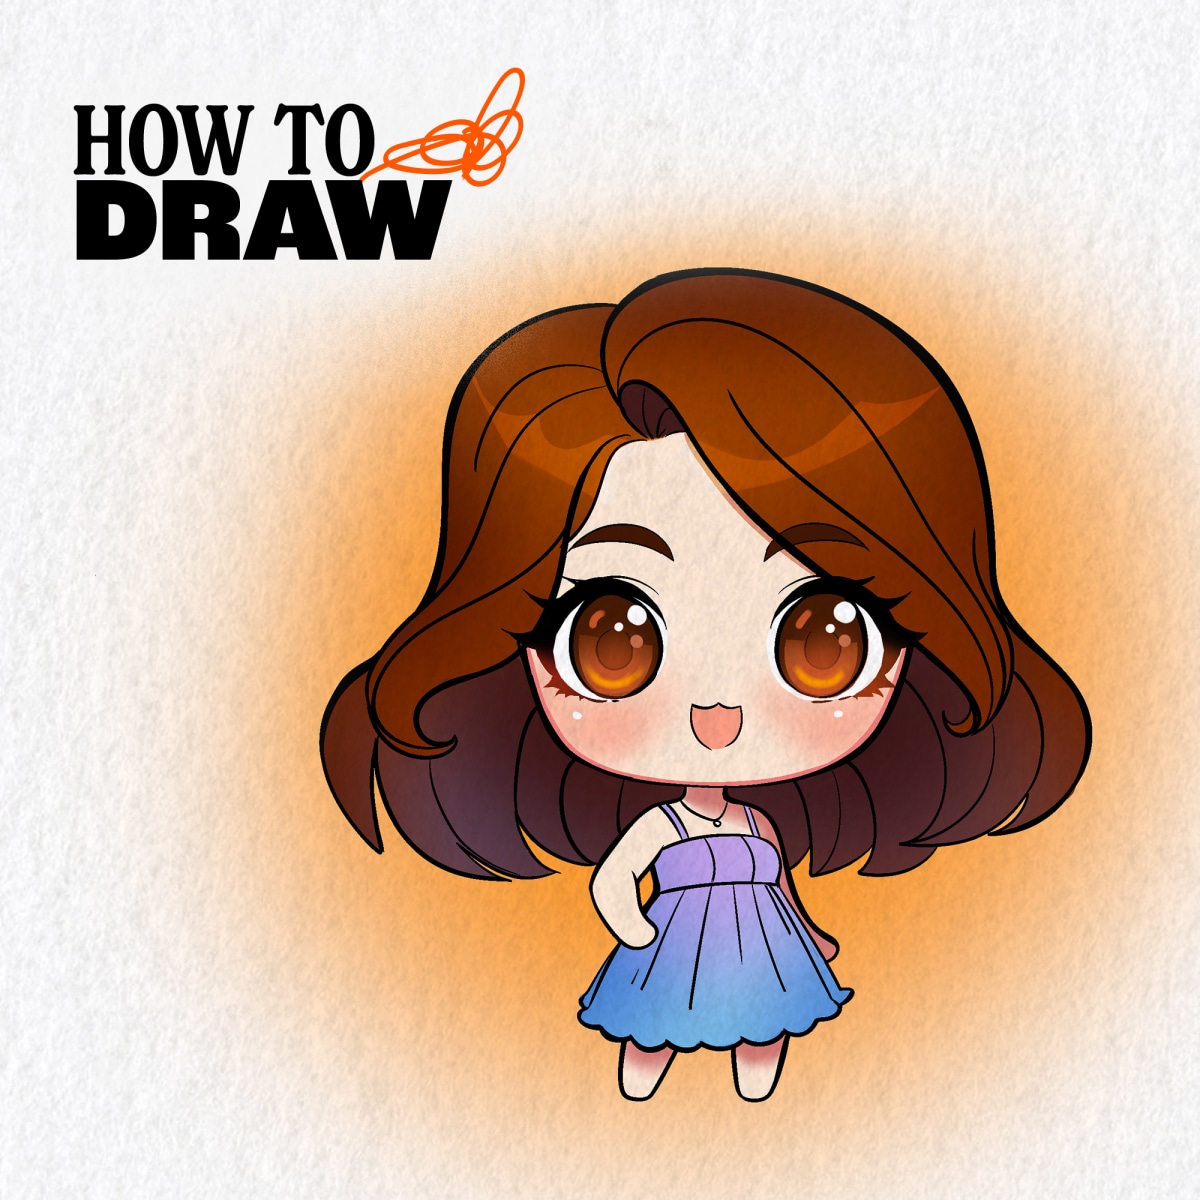 How to Draw a Candy Cane Cute Girl | Christmas - YouTube